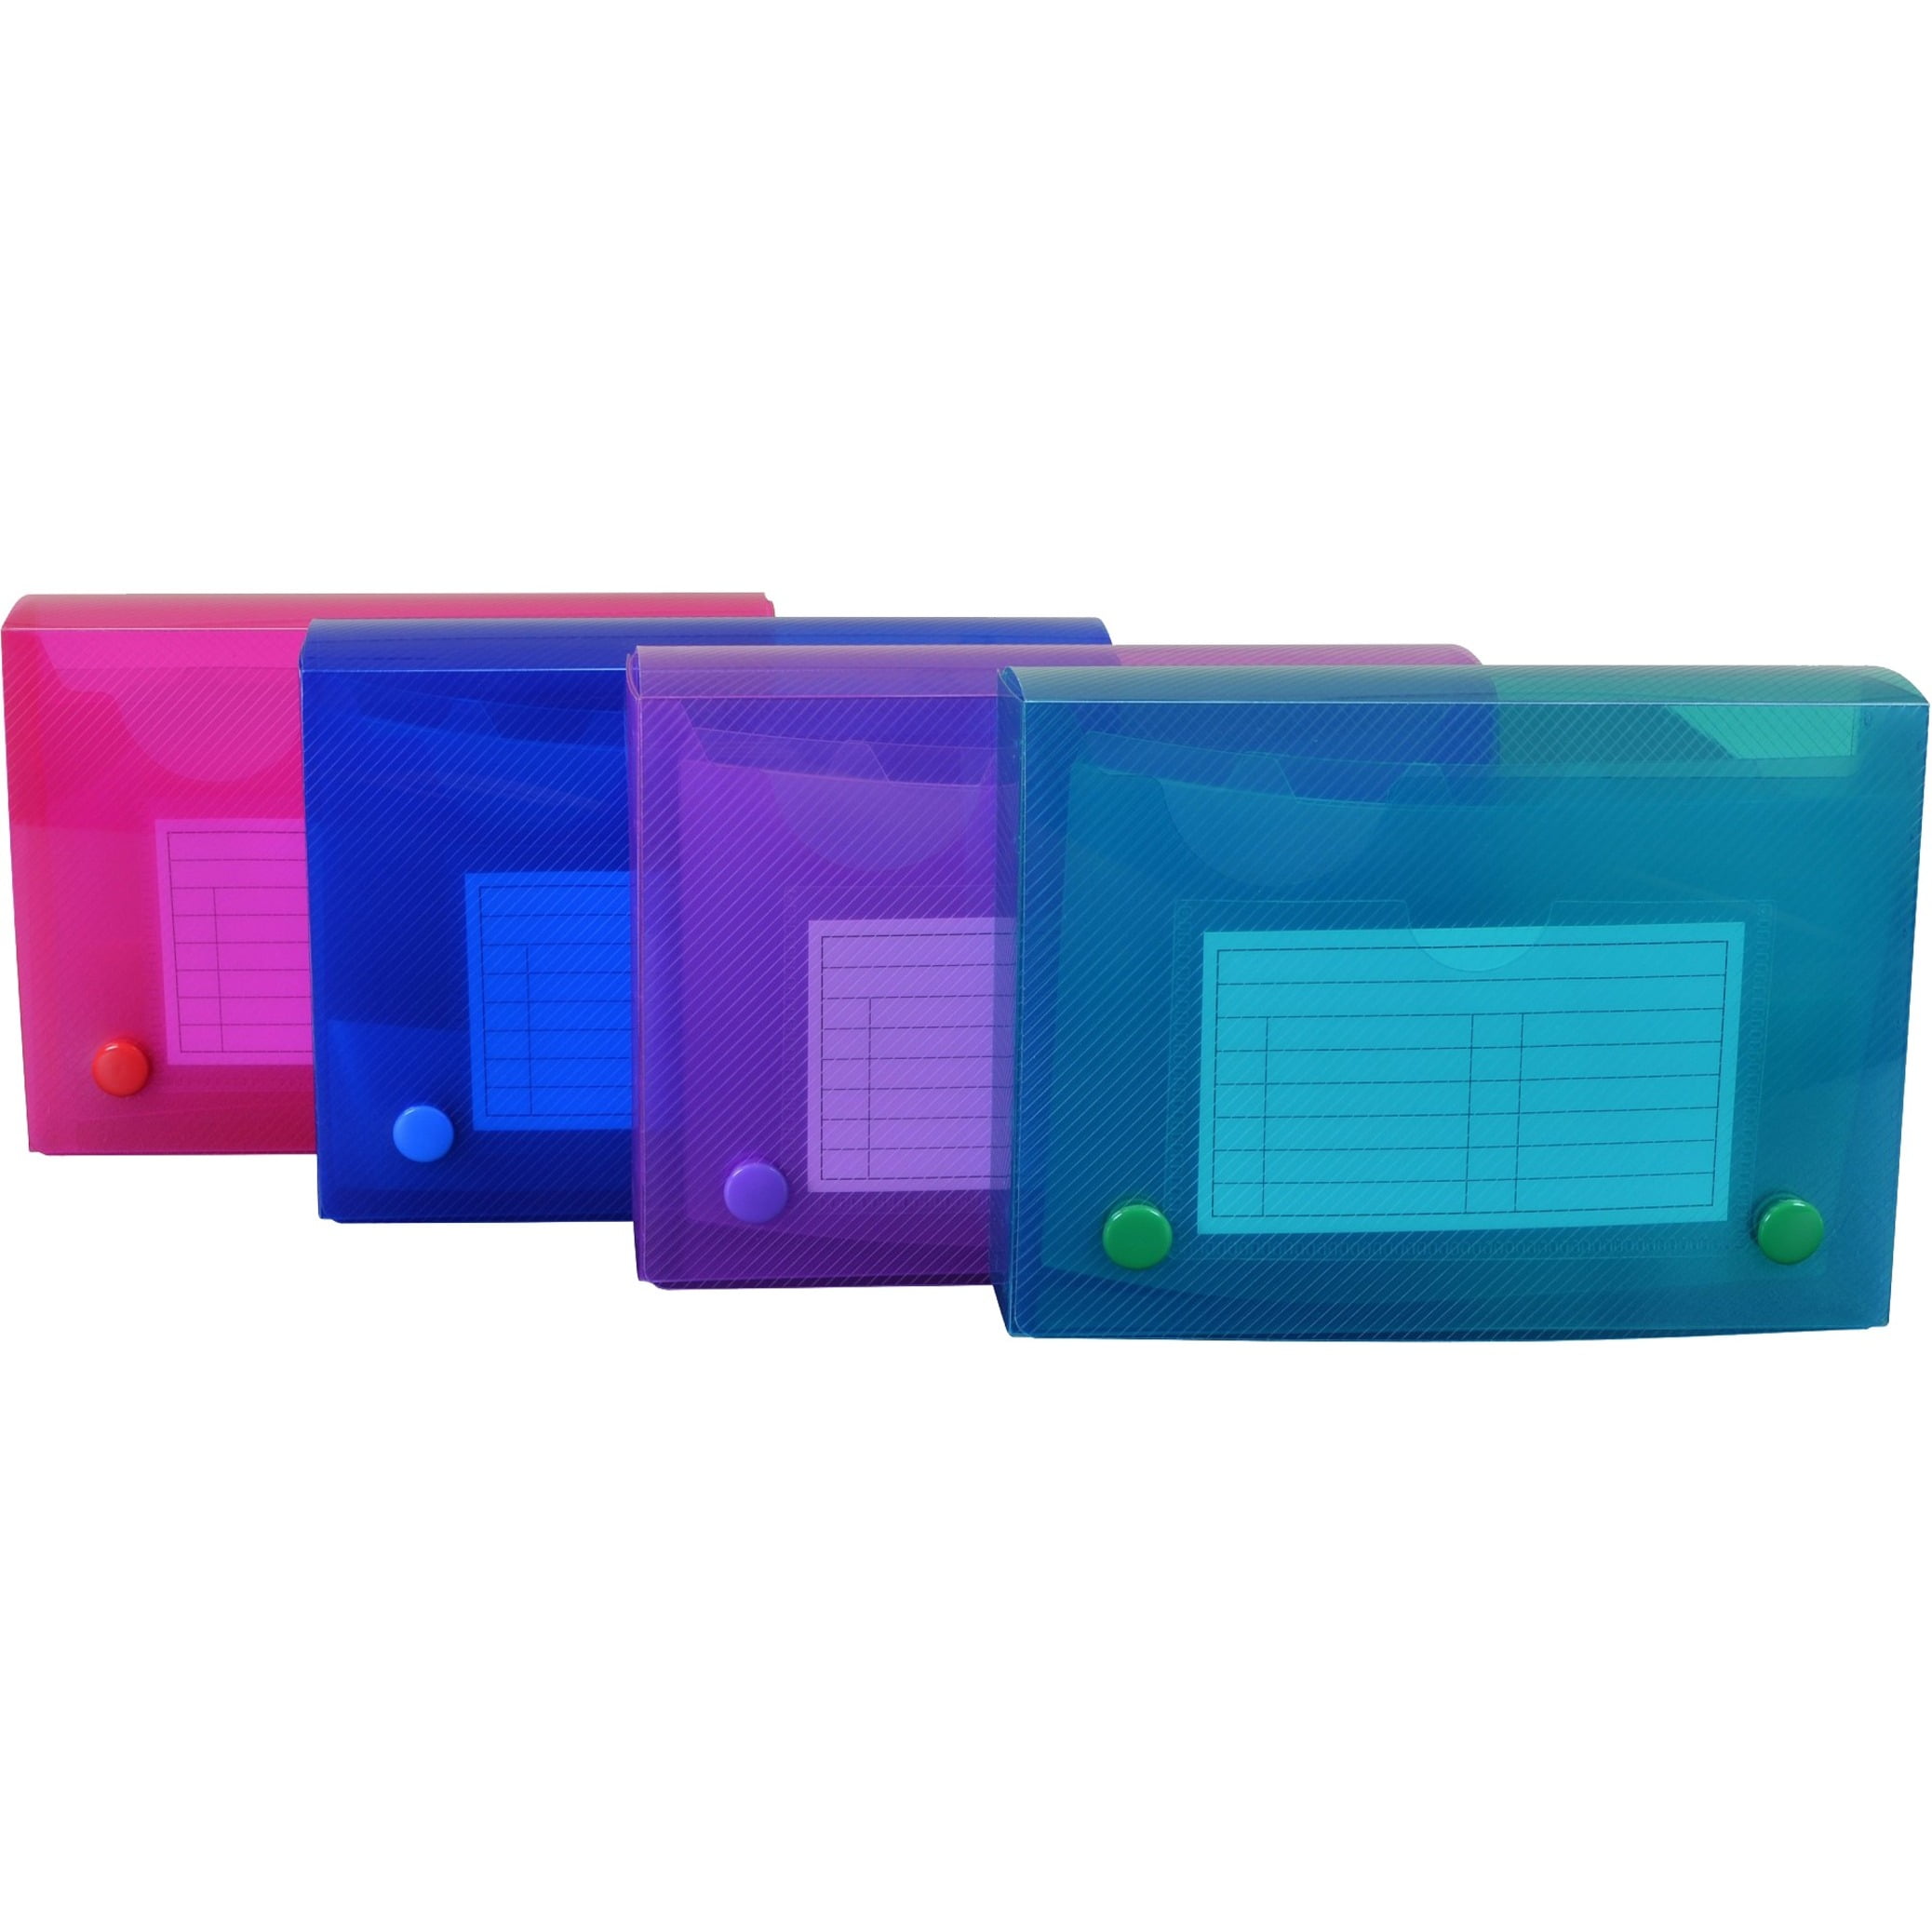 4 x 6 Inches C-Line Polypropylene Index Card Case Colors May Vary 